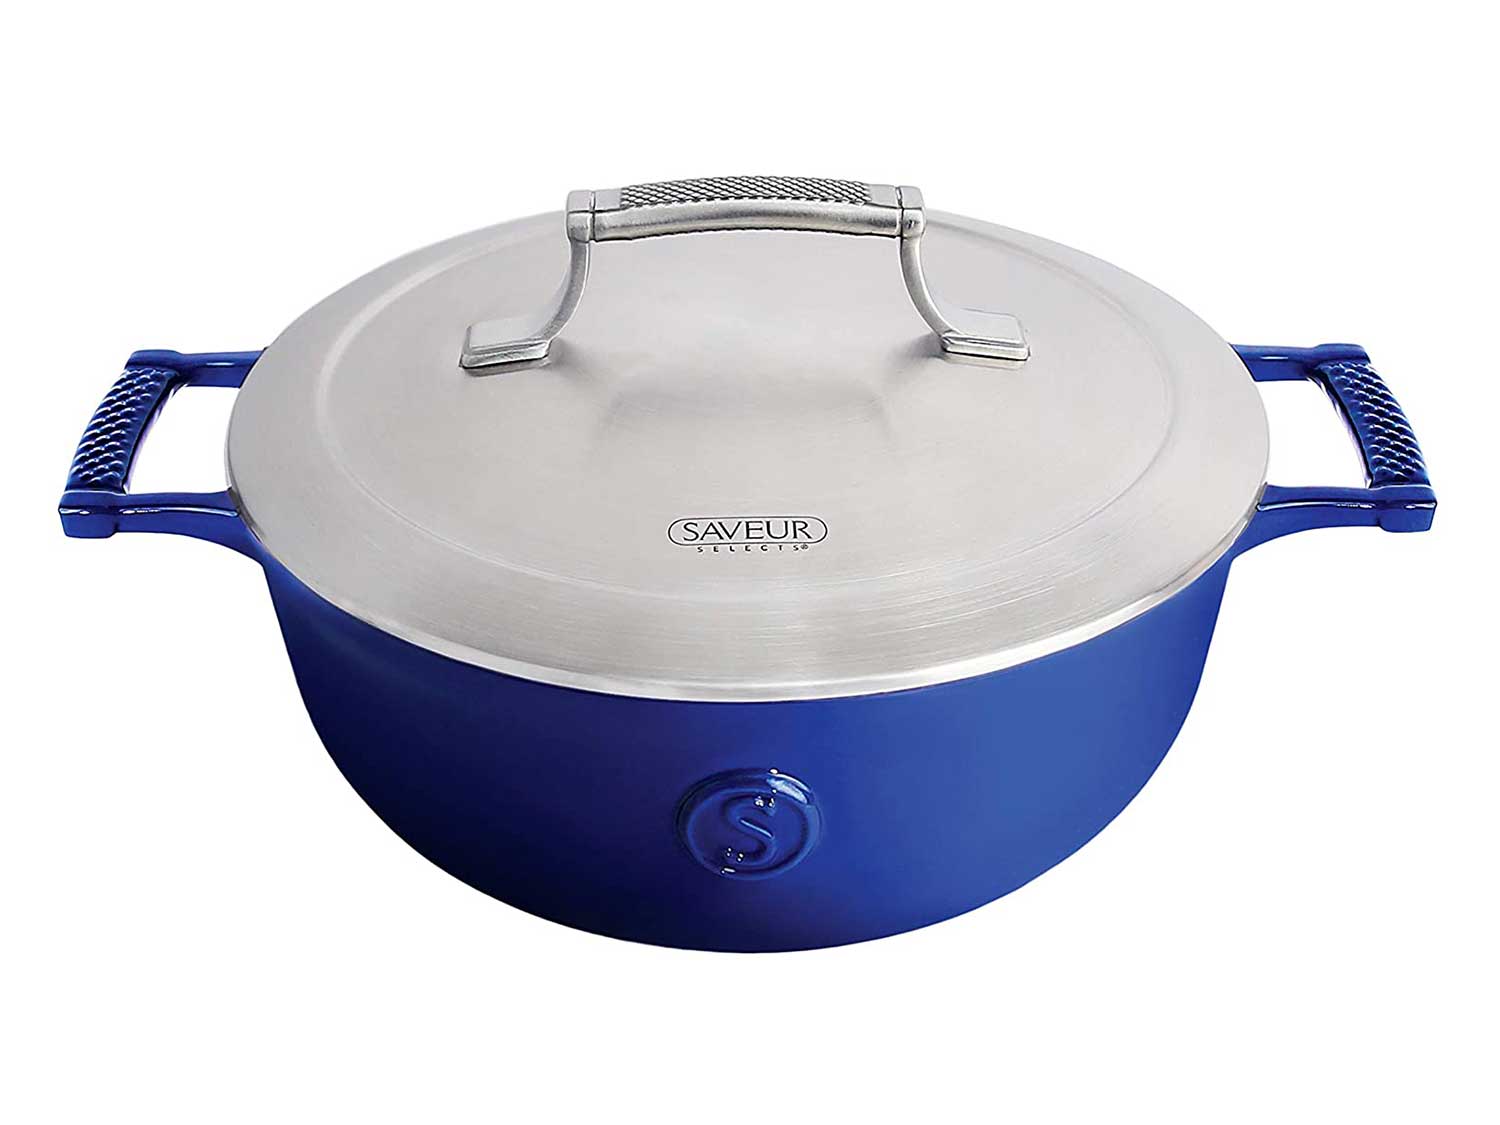 SAVEUR SELECTS Enameled Cast Iron 3-1/2-Quart Saucier with Stainless Steel Lid, Classic Blue, Voyage Series